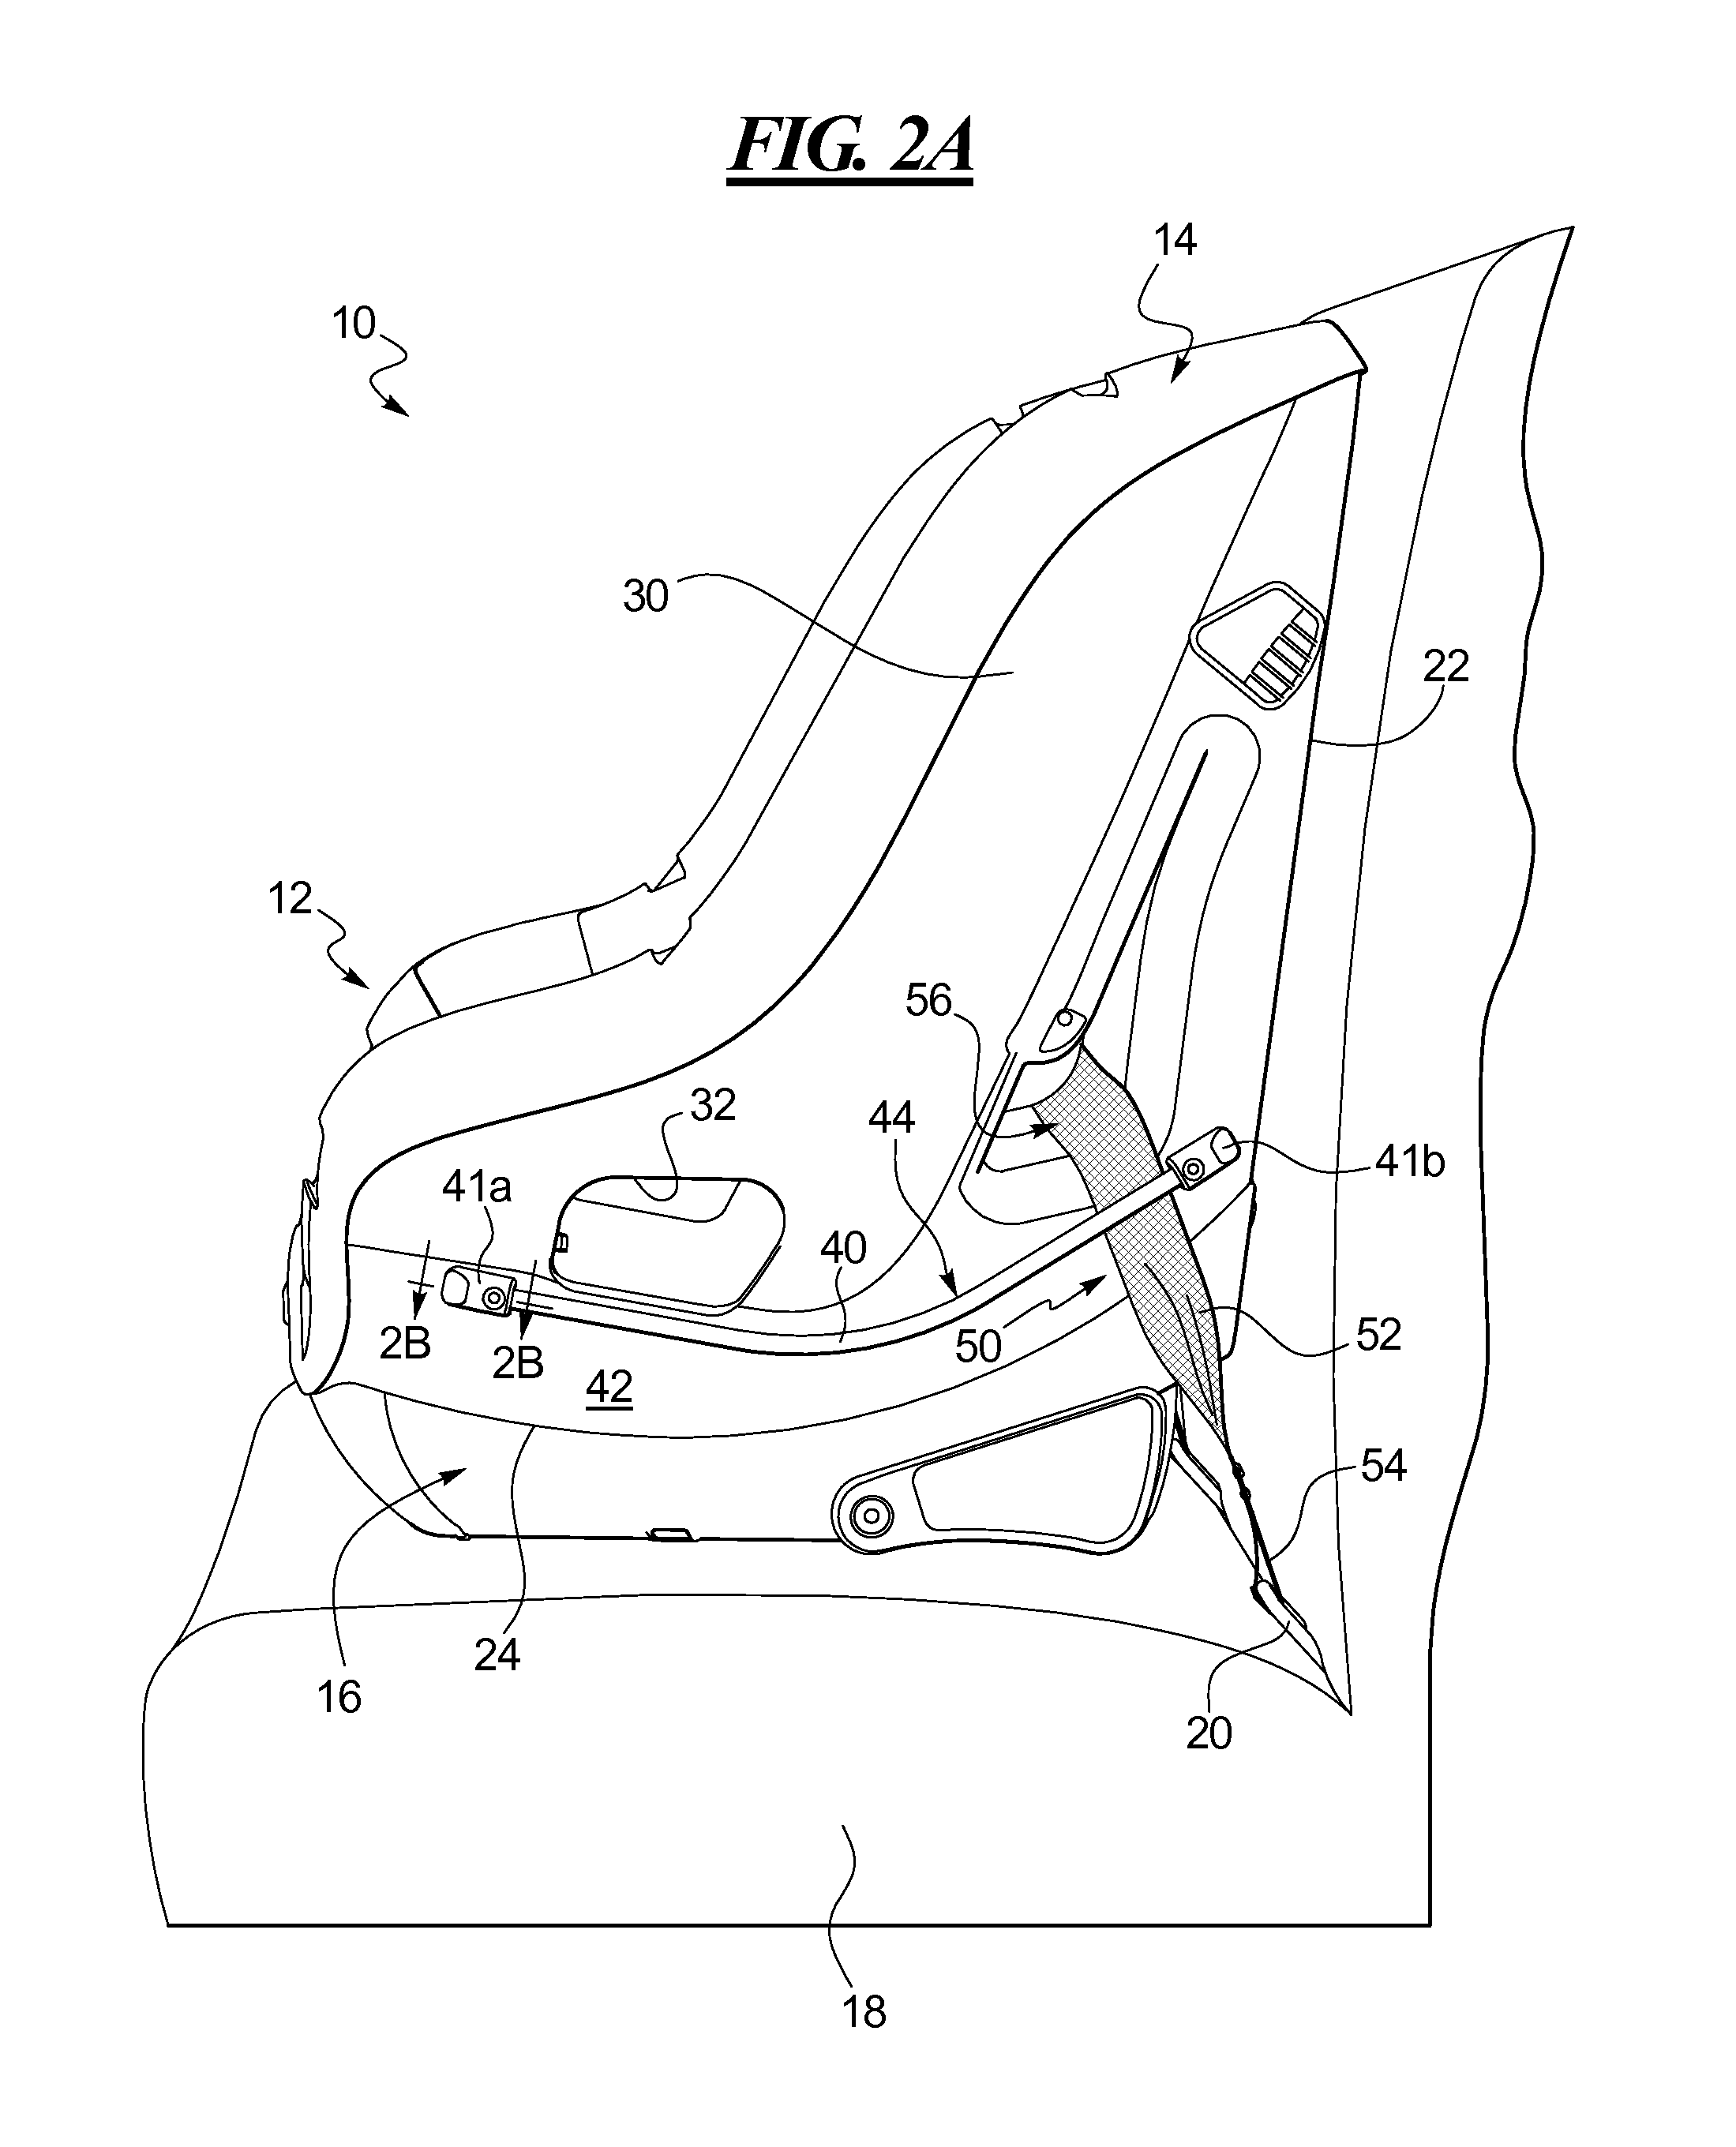 Anchor latch assembly for child restraint system